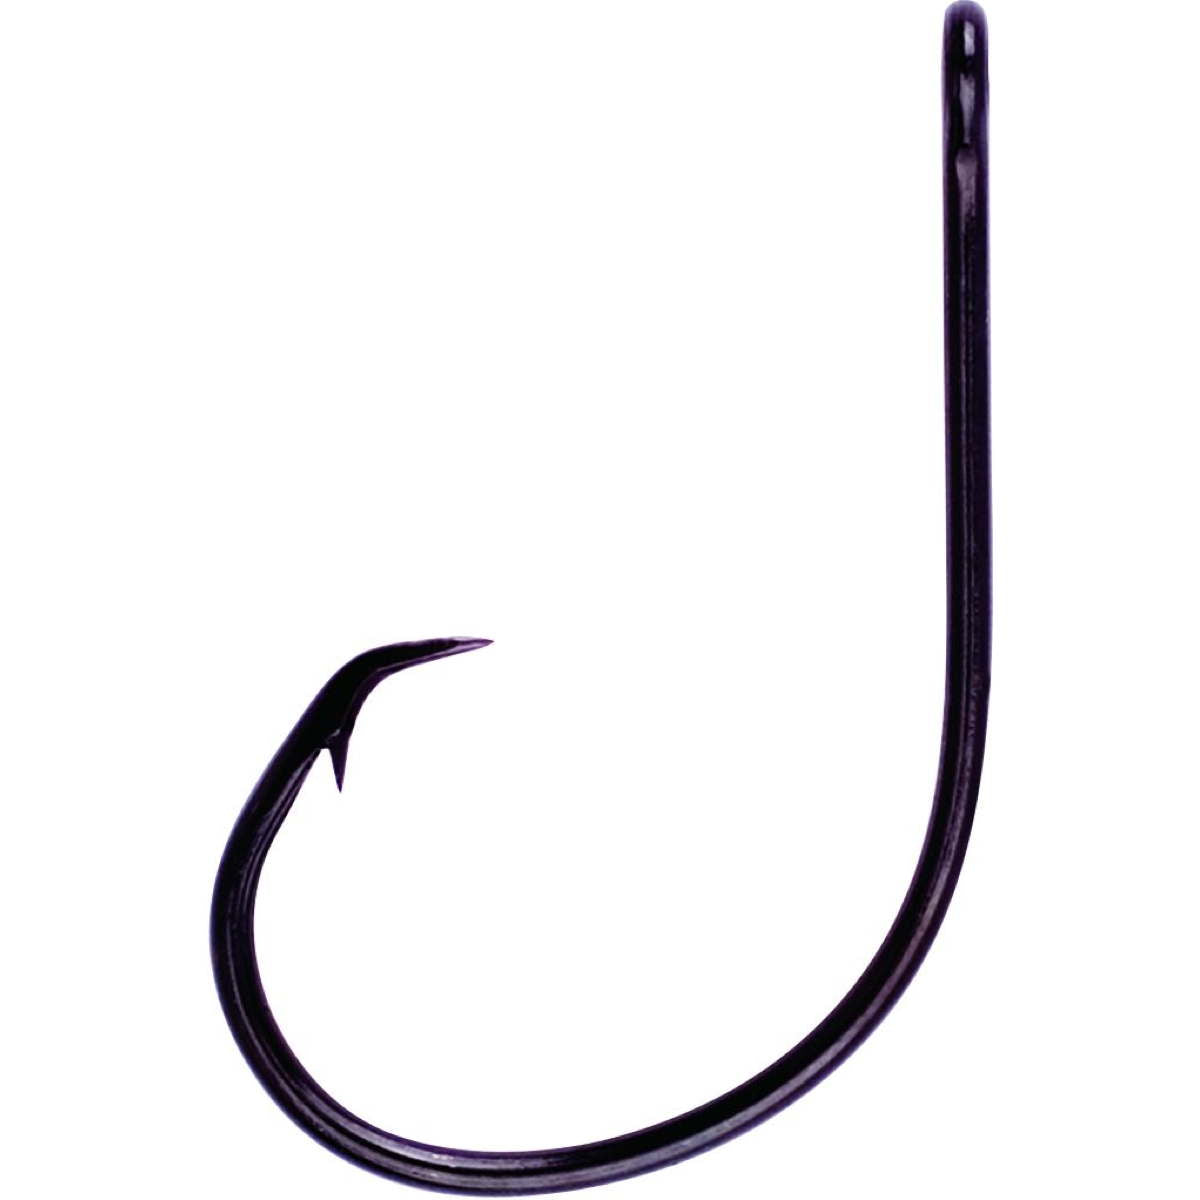 Photo of Eagle Claw Lazer Sharp Circle Sea Hook for sale at United Tackle Shops.